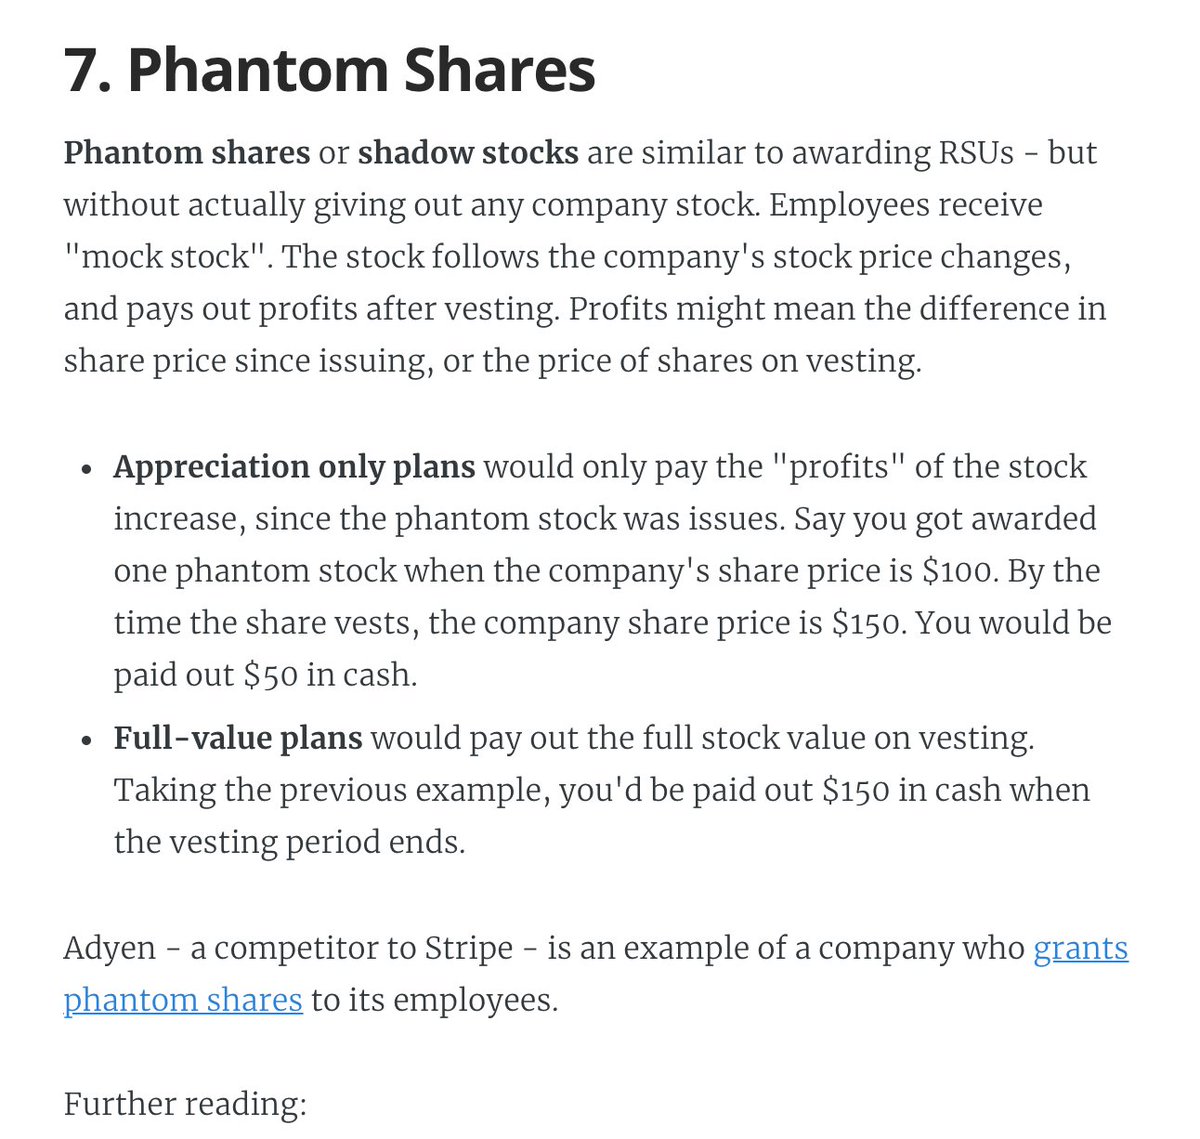 6. ESPP: a (typically) amazing employee perk at publicly traded companies. There's always risk, but this plan can typically offer good upsides.7. Phantom shares. An interesting setup similar to RSUs... but you don't own stocks. Not frequent, but e.g. Adyen goes with this plan.